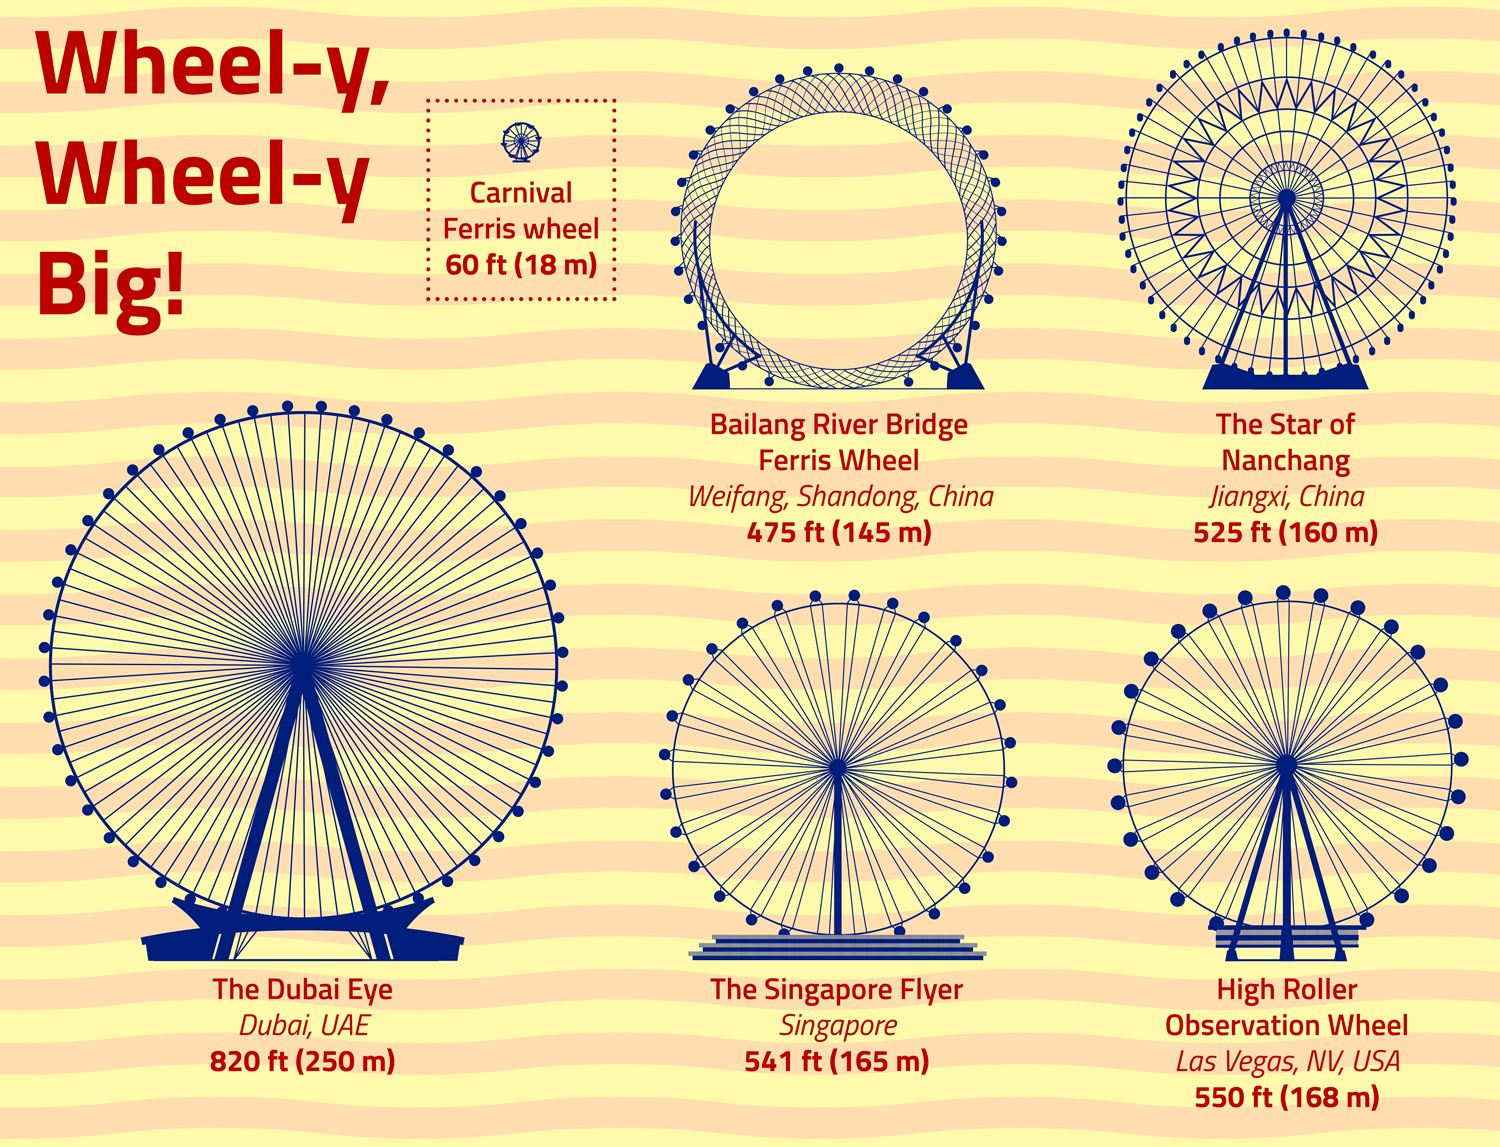 Size comparison of large city Ferris wheels and a typical carnival Ferris wheel shown in measurements and diagrams.